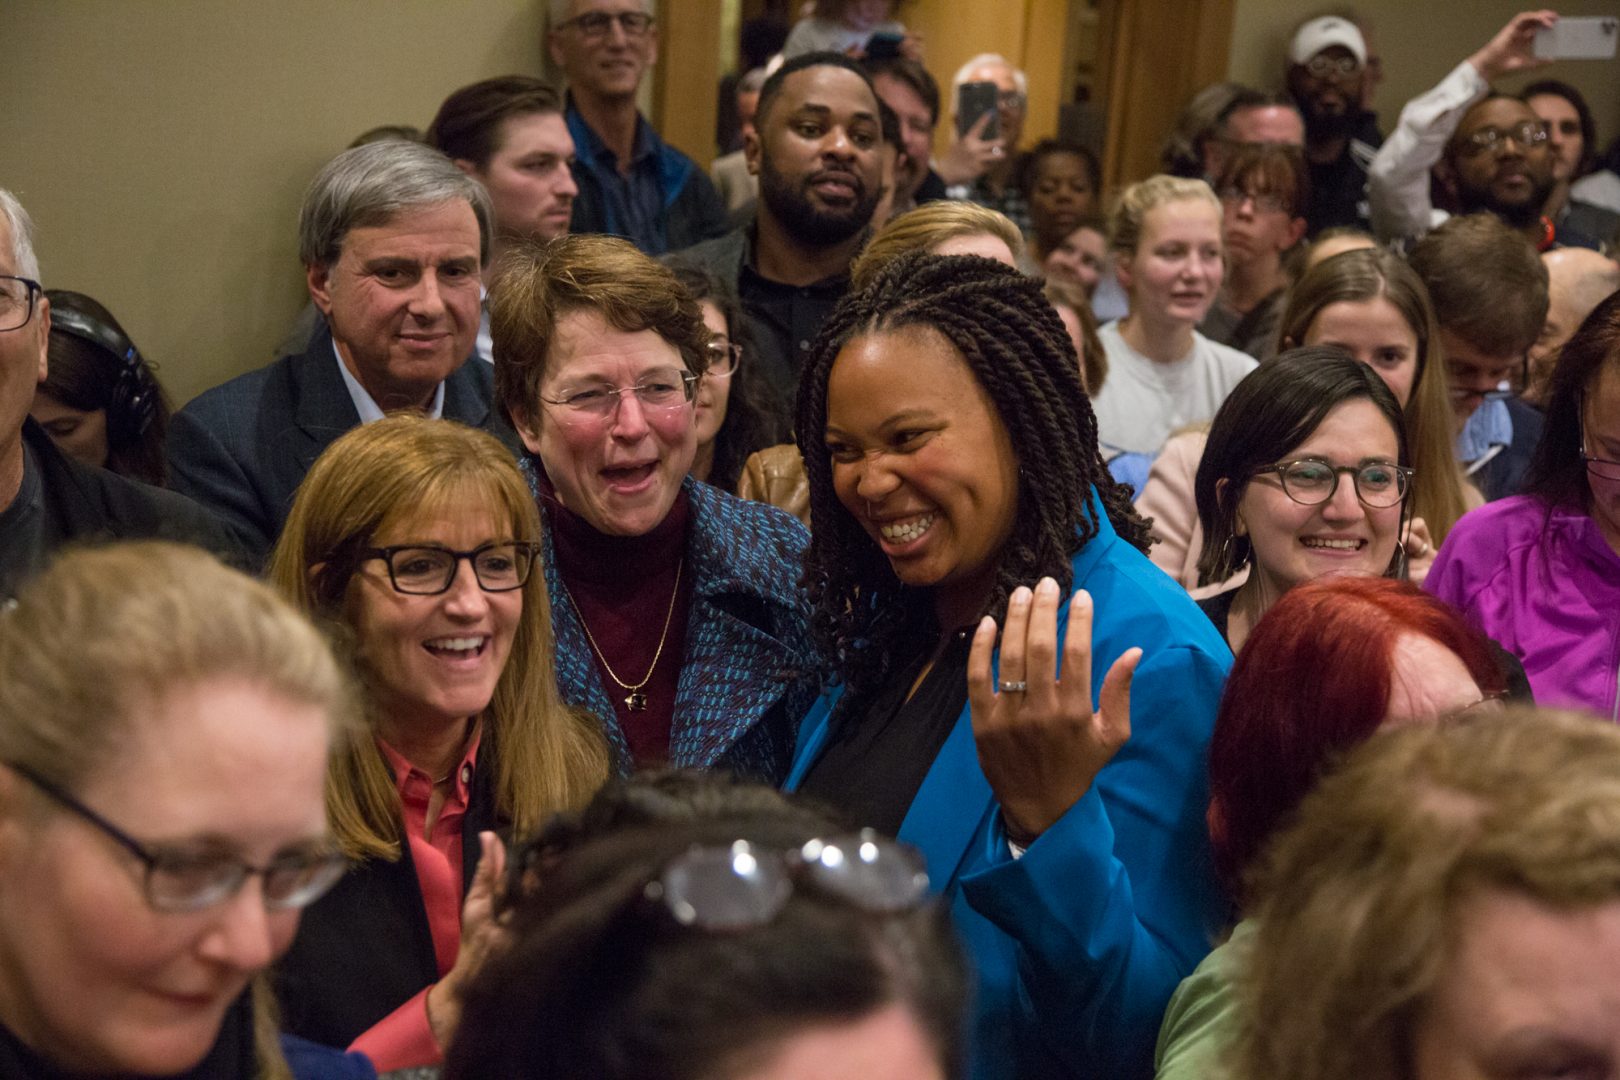 Elaine Paul Schaefer (left center), Christine Reuther, and Monica Taylor celebrate their historic win for the 3 open seats on the Delaware County city council. Their win flips the majority on the council for the first time in county history. They celebrated at the Democratic election night party in Swarthmore November 5th 2019.